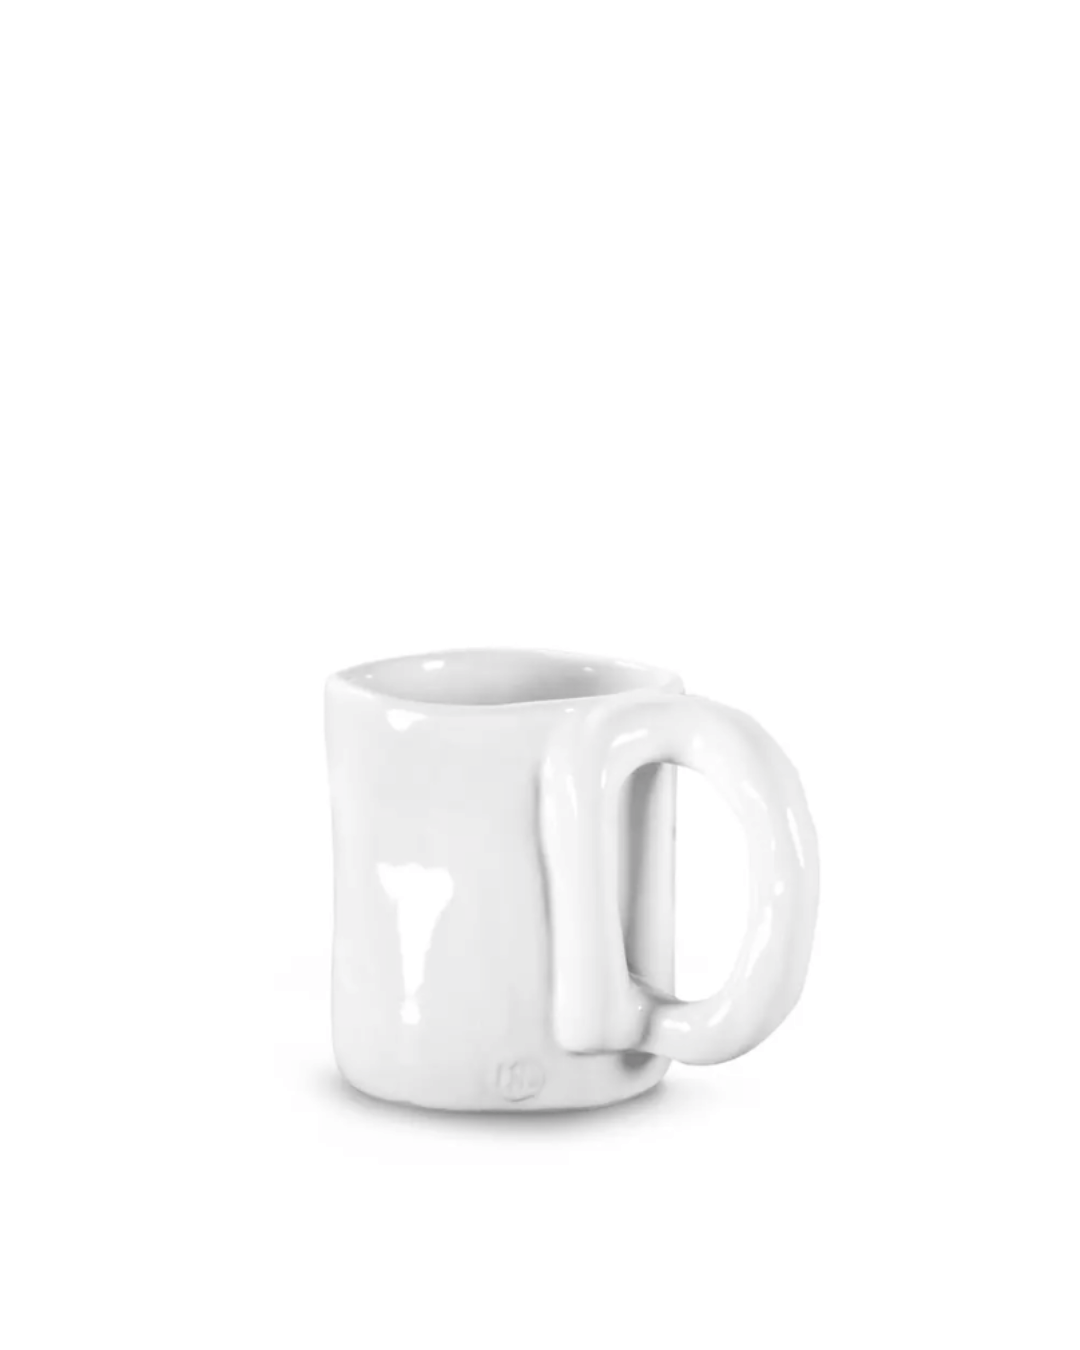 A white ceramic Mug No. 205 by Montes Doggett with an intentionally irregular shape, featuring a thick handle and a slightly uneven surface, is displayed against a plain white background. The handmade ceramic dinnerware design gives the mug a rustic appearance, highlighting its high-fired quality and crafting origins in Peru.